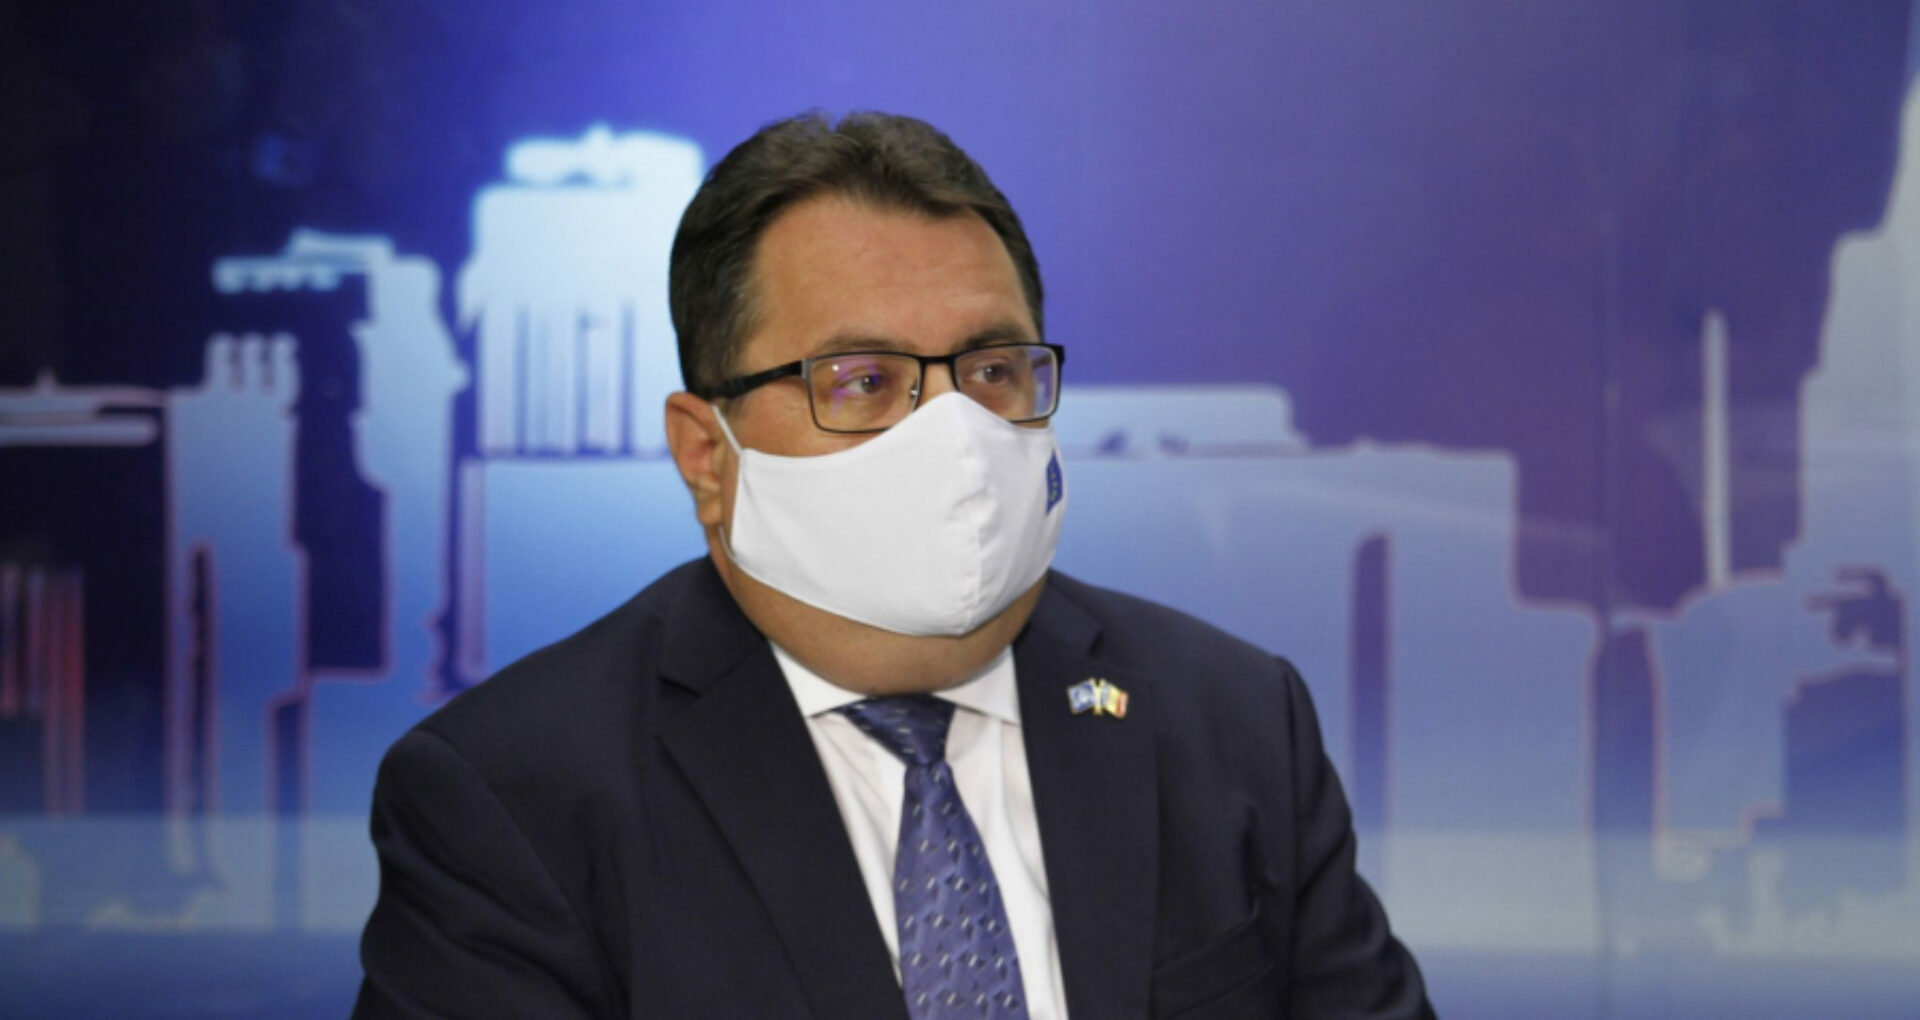 The EU Ambassador to Chisinau Says the Authorities Set an Example for the Country in the Pandemic Context